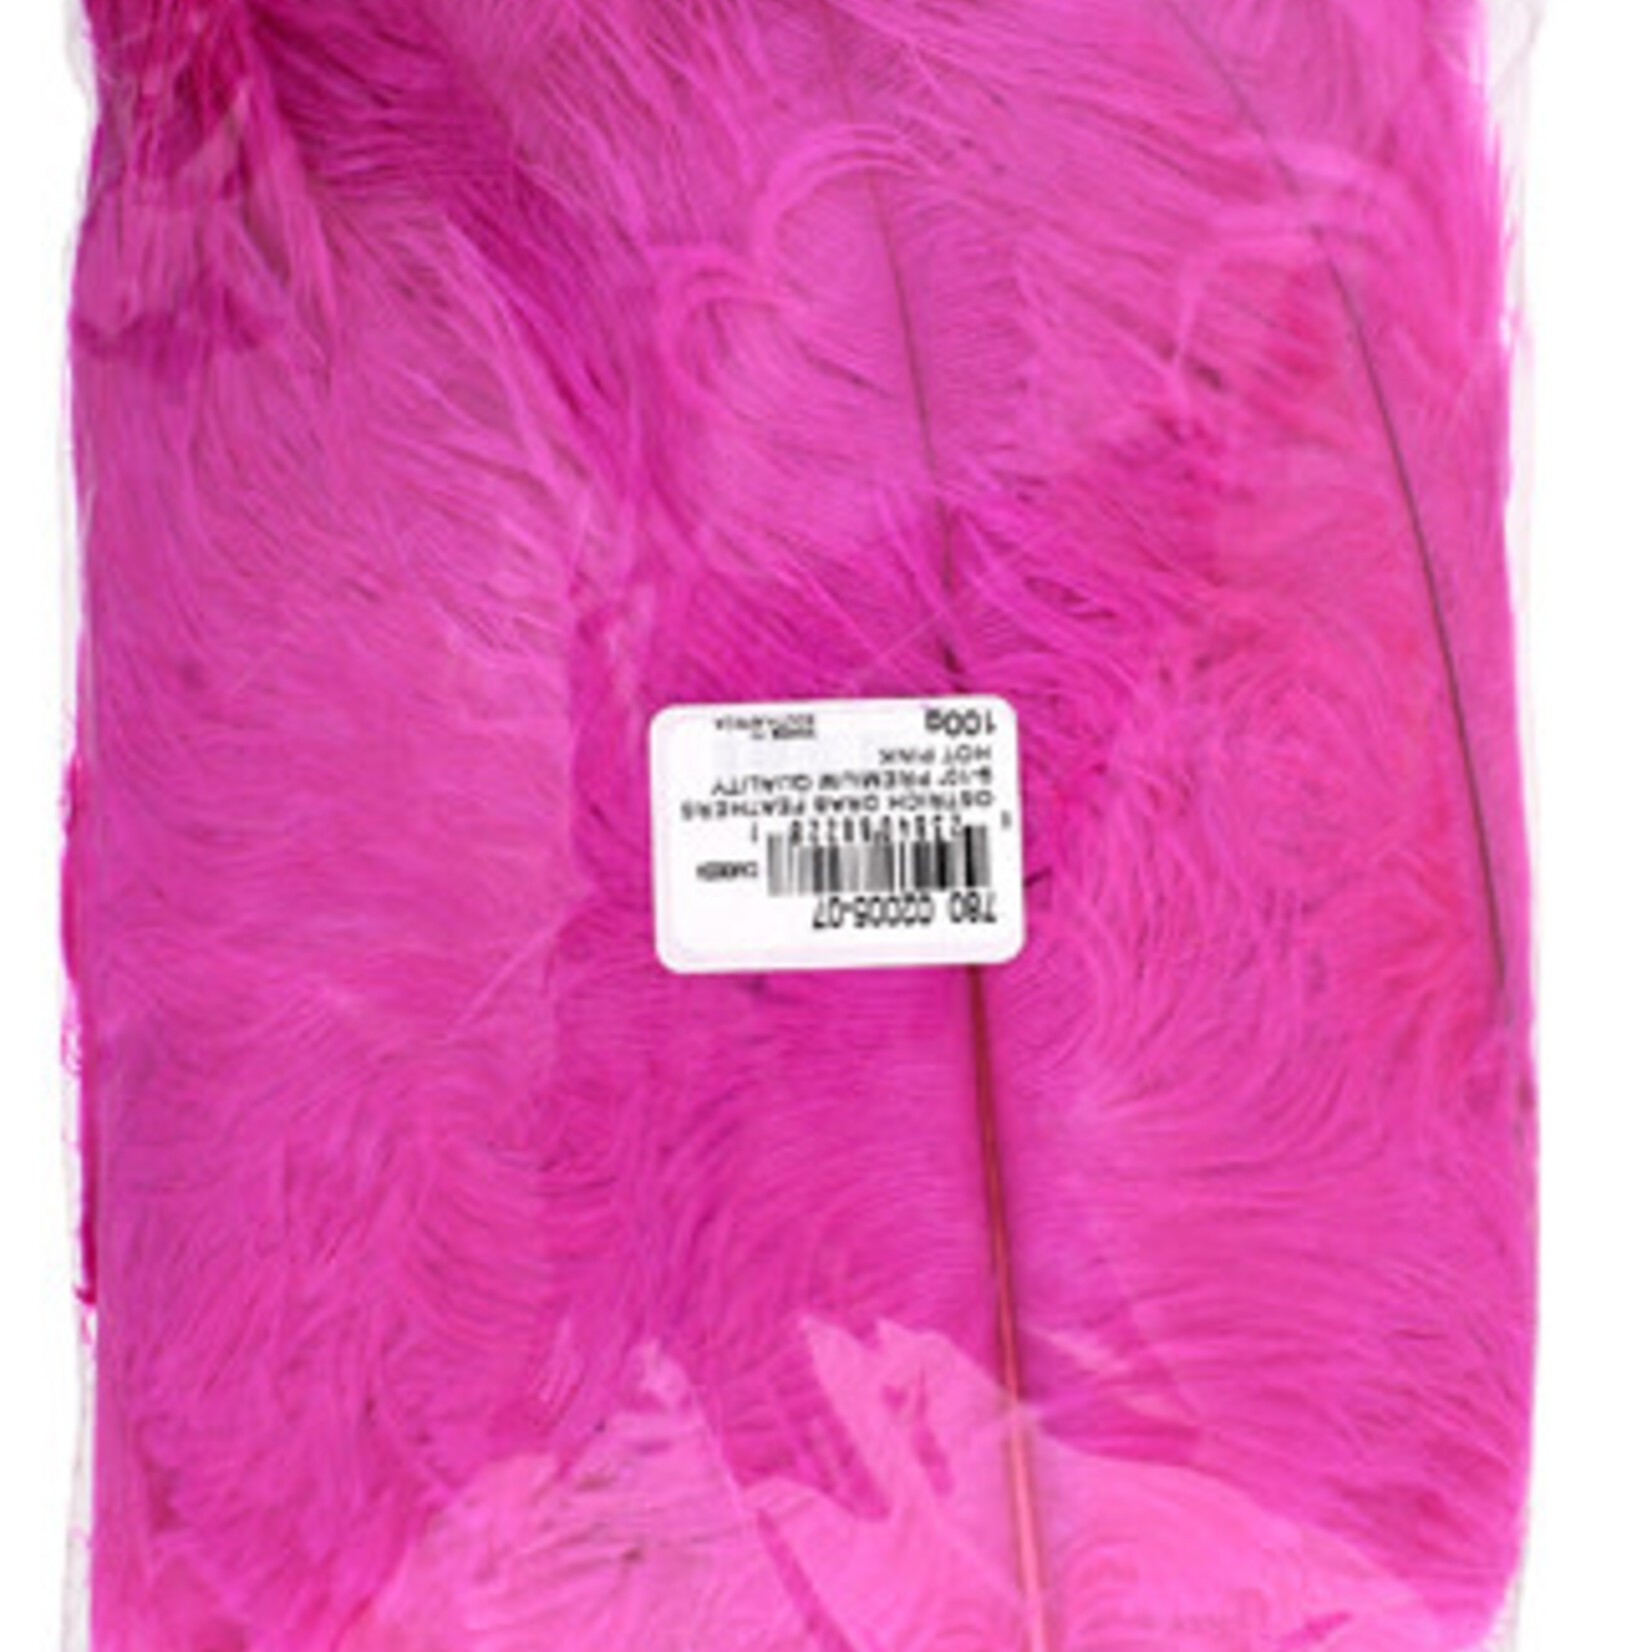 O.D Plumes 6-8 Inch (100 grams) Hot Pink